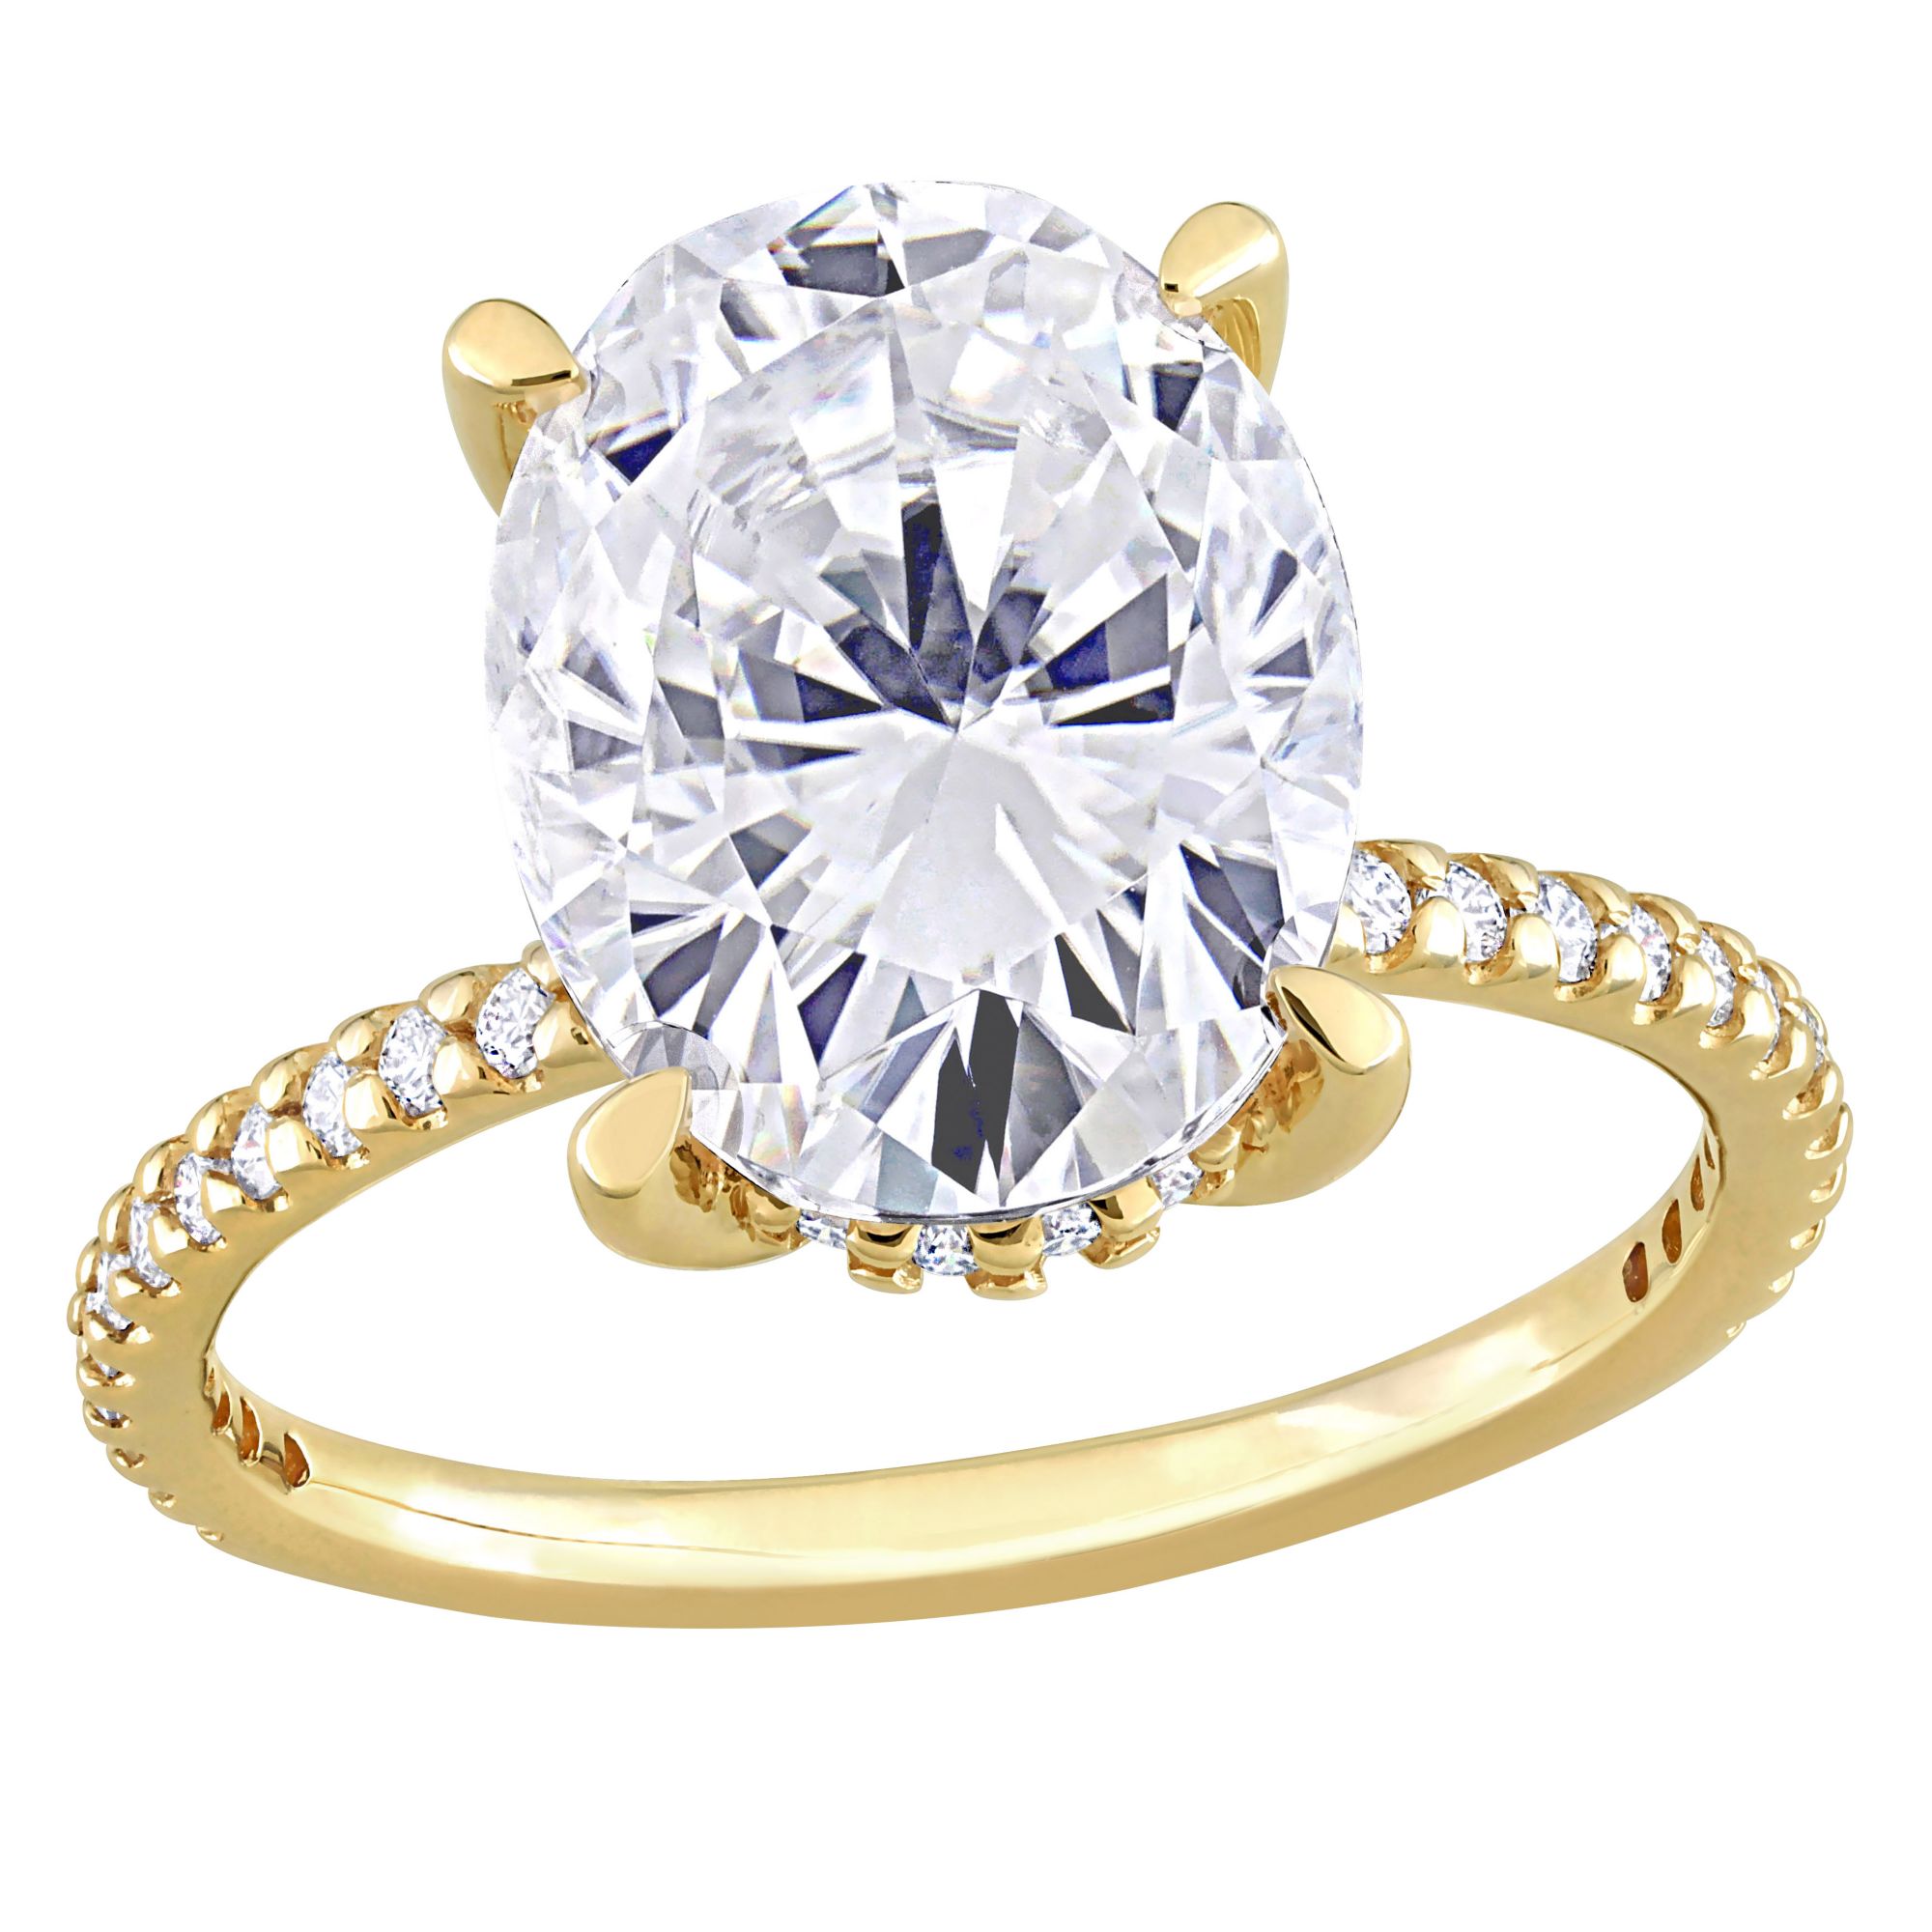 4.87 ct. DEW Oval Moissanite Engagement Ring in 10k Yellow Gold